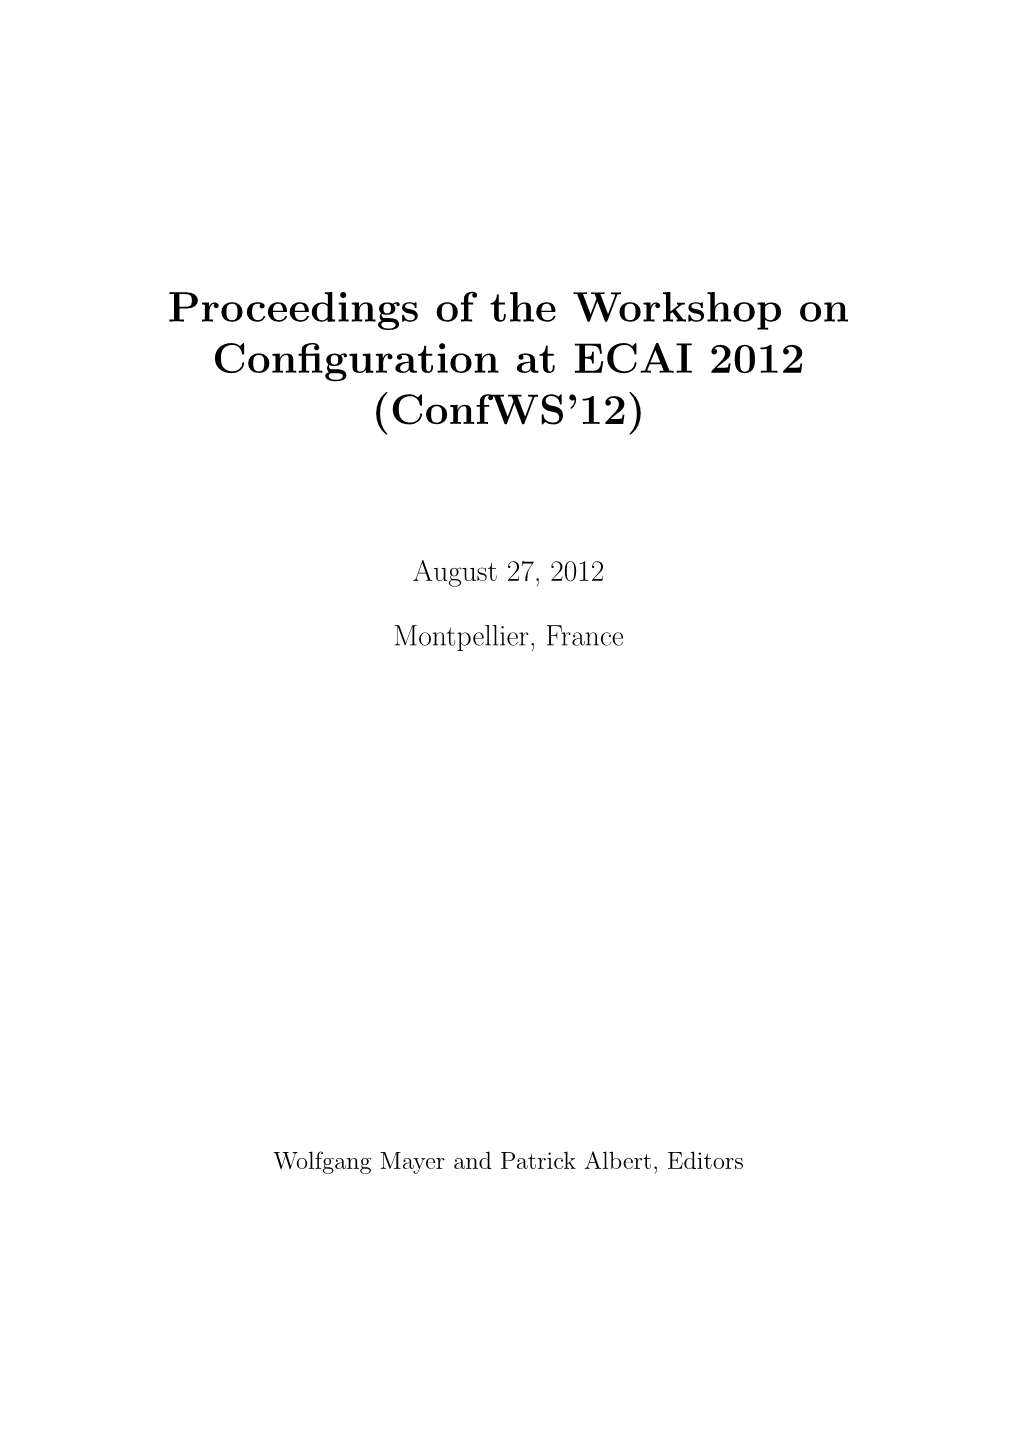 Proceedings of the Workshop on Configuration at ECAI 2012